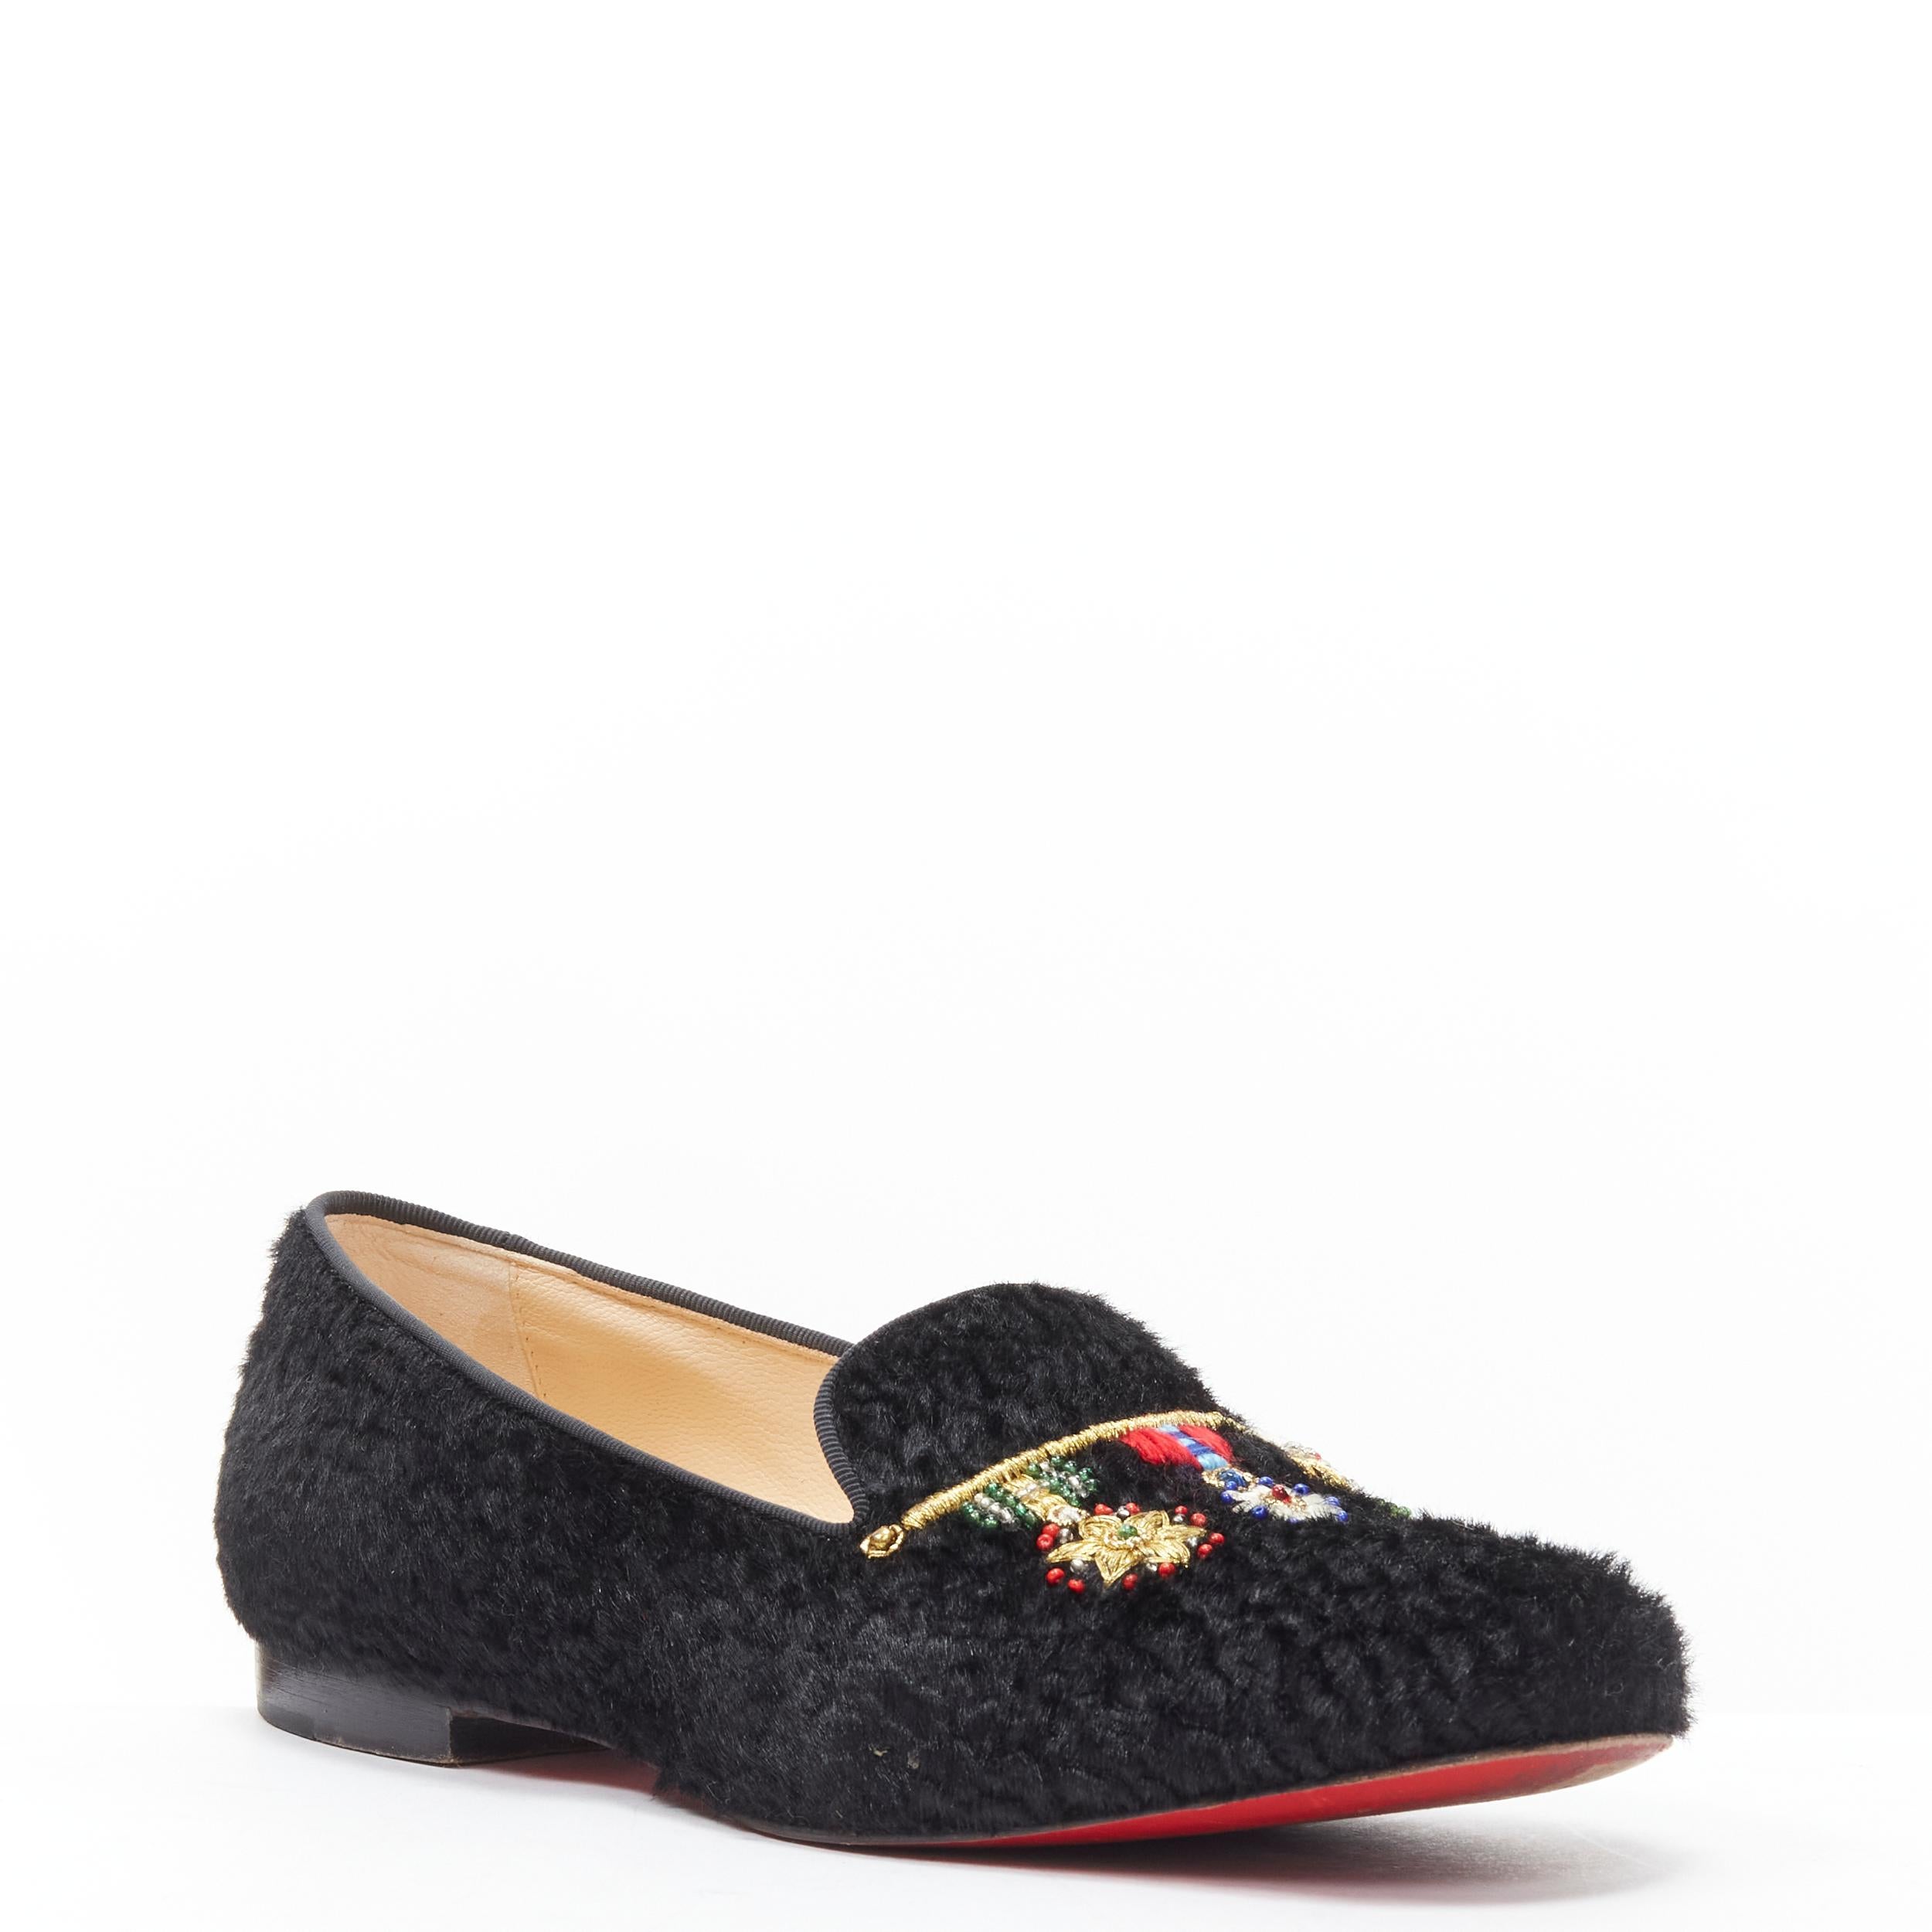 Black CHRISTIAN LOUBOUTIN Dictatrice Flat Pony Astrakan black embroidered loafer EU37